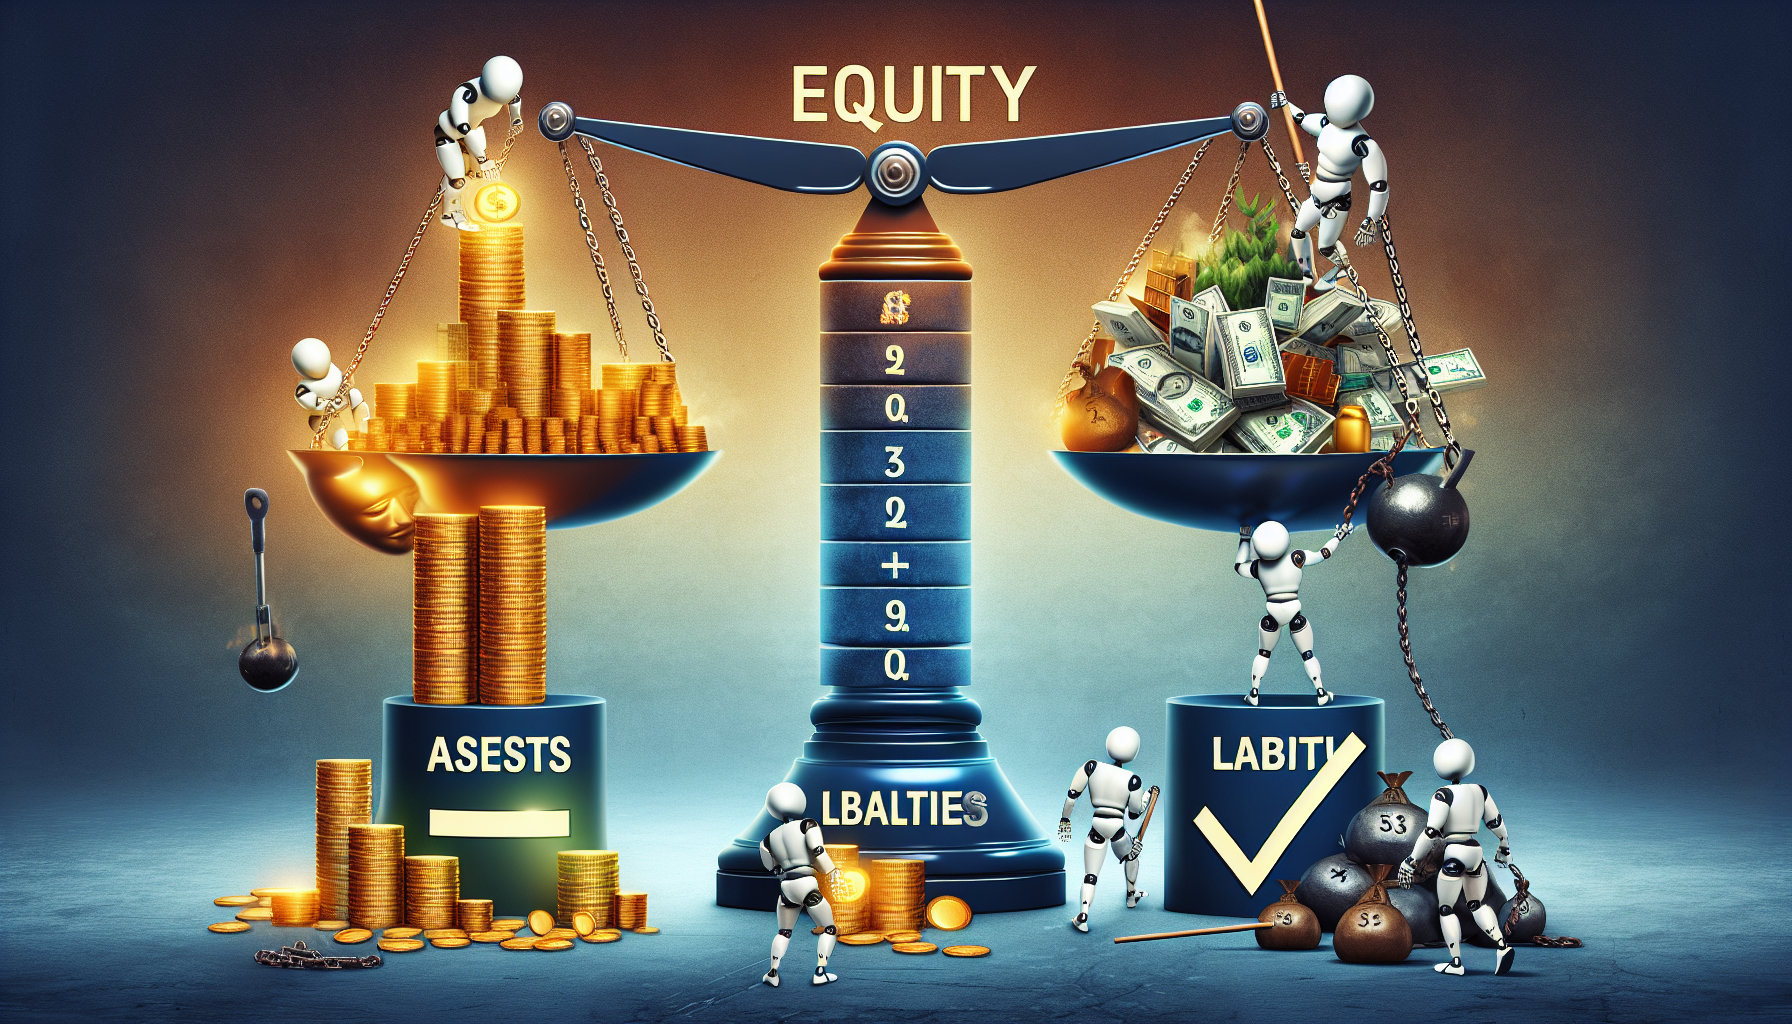 Illustration of equity calculation process